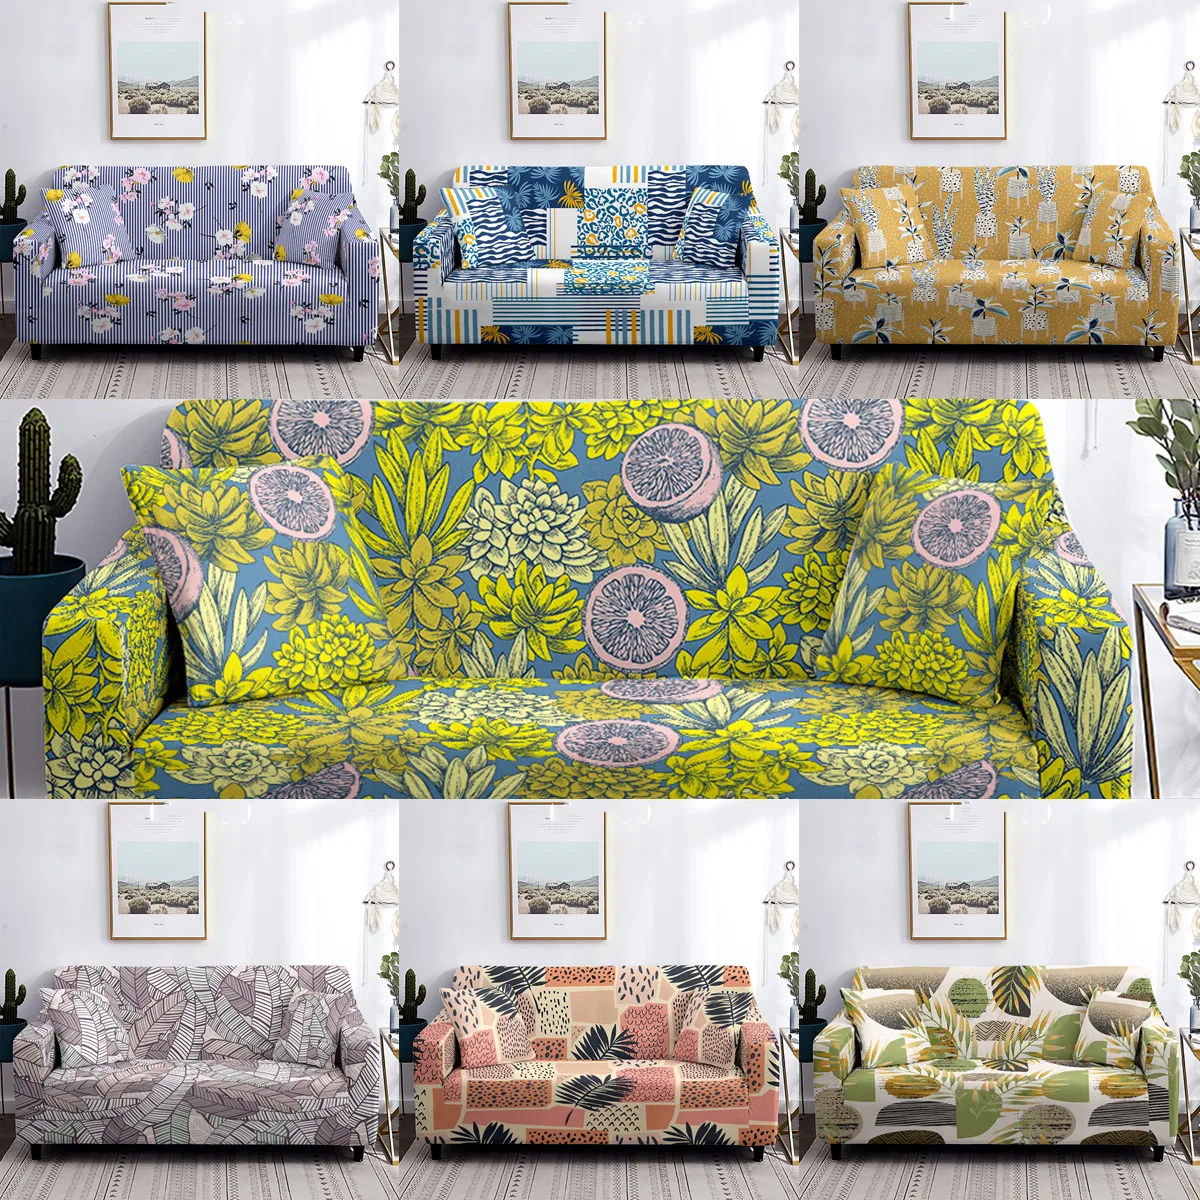 Magic Green Geometry Extensible Sofa L shape Couch Cover Yellow Sunflower Living Room 3 Seat Sofa Cover